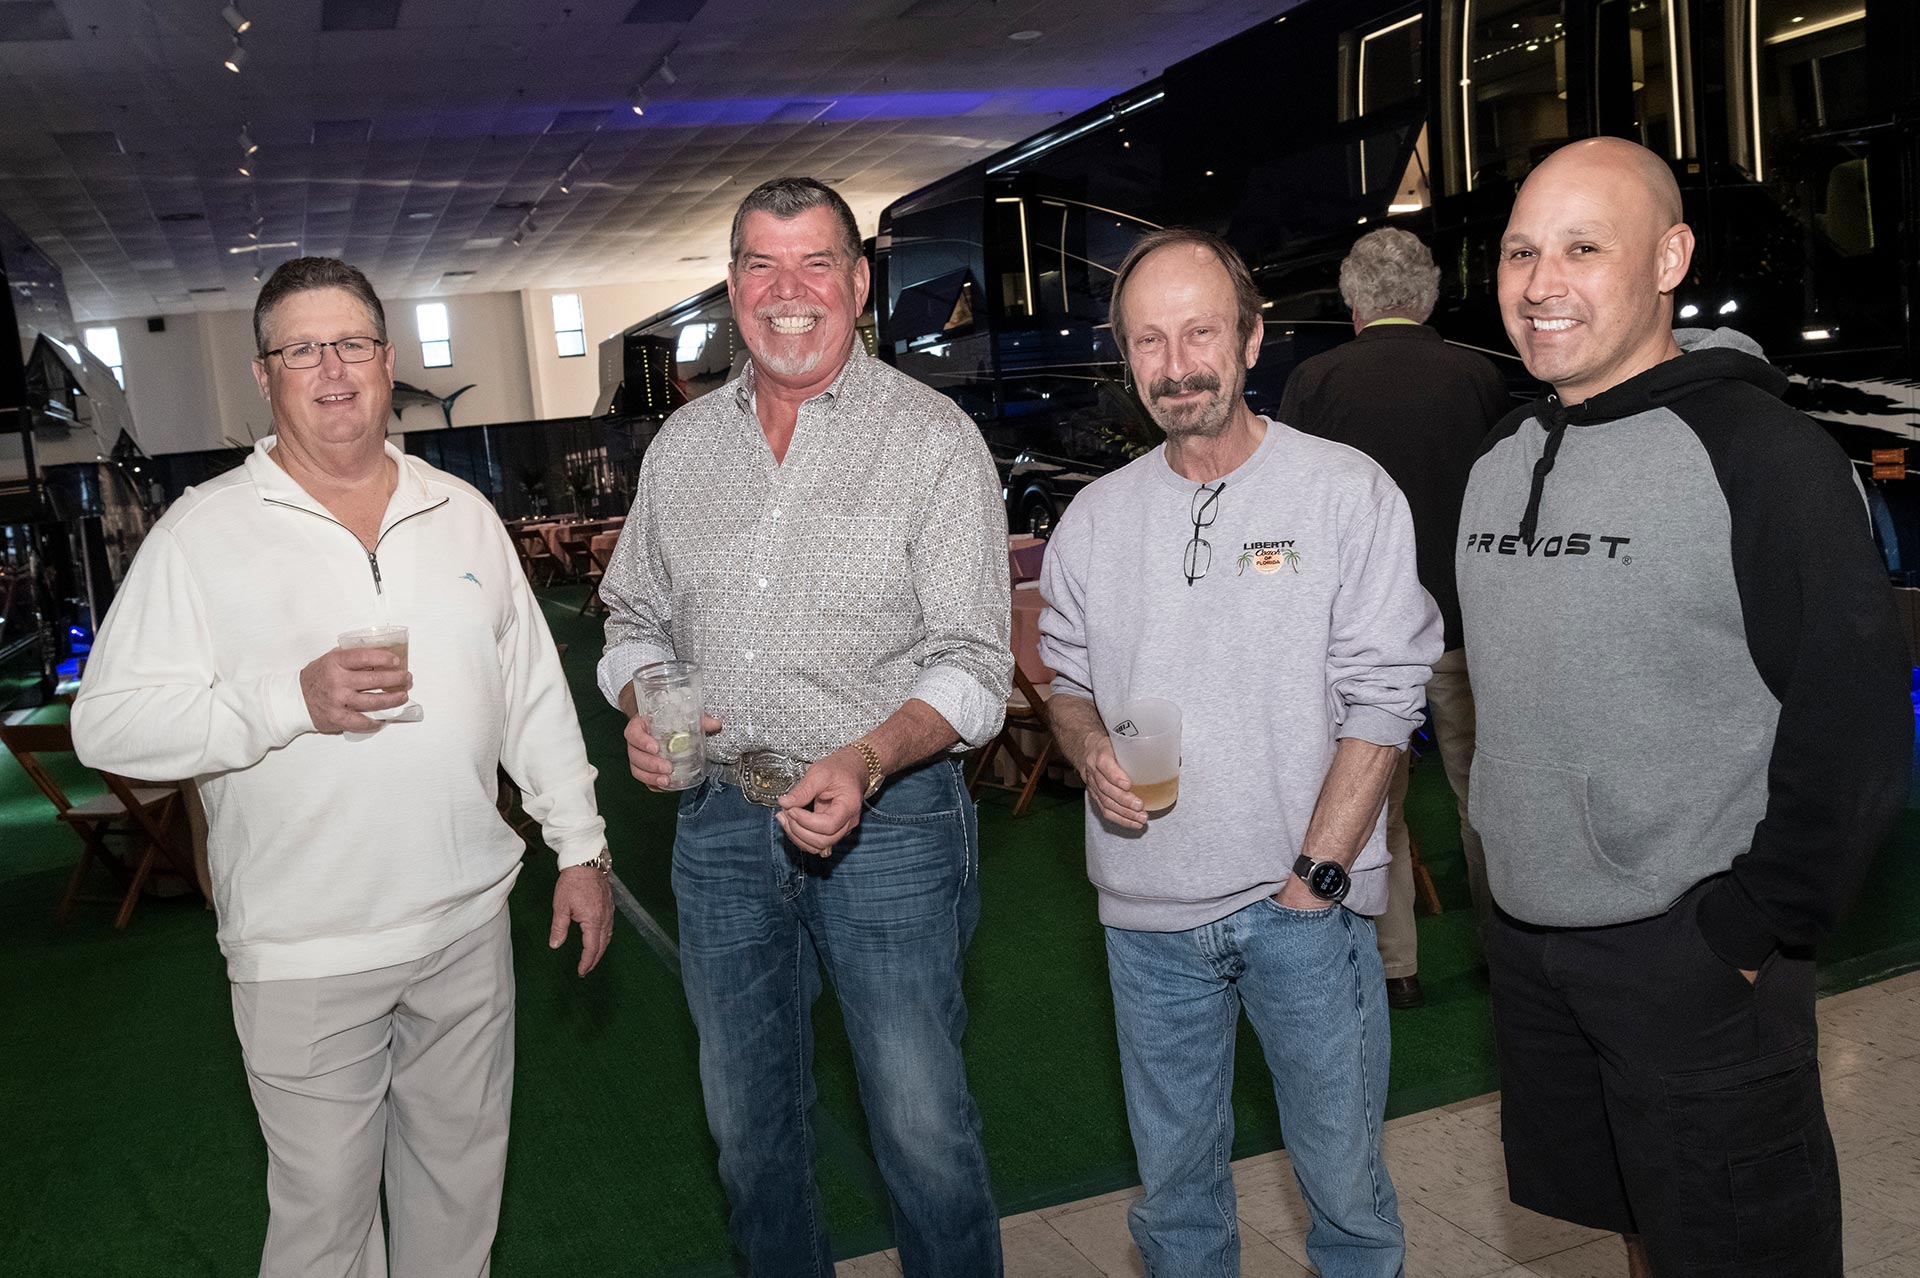 20th Annual Rally - Men Enjoying Drinks and Conversation